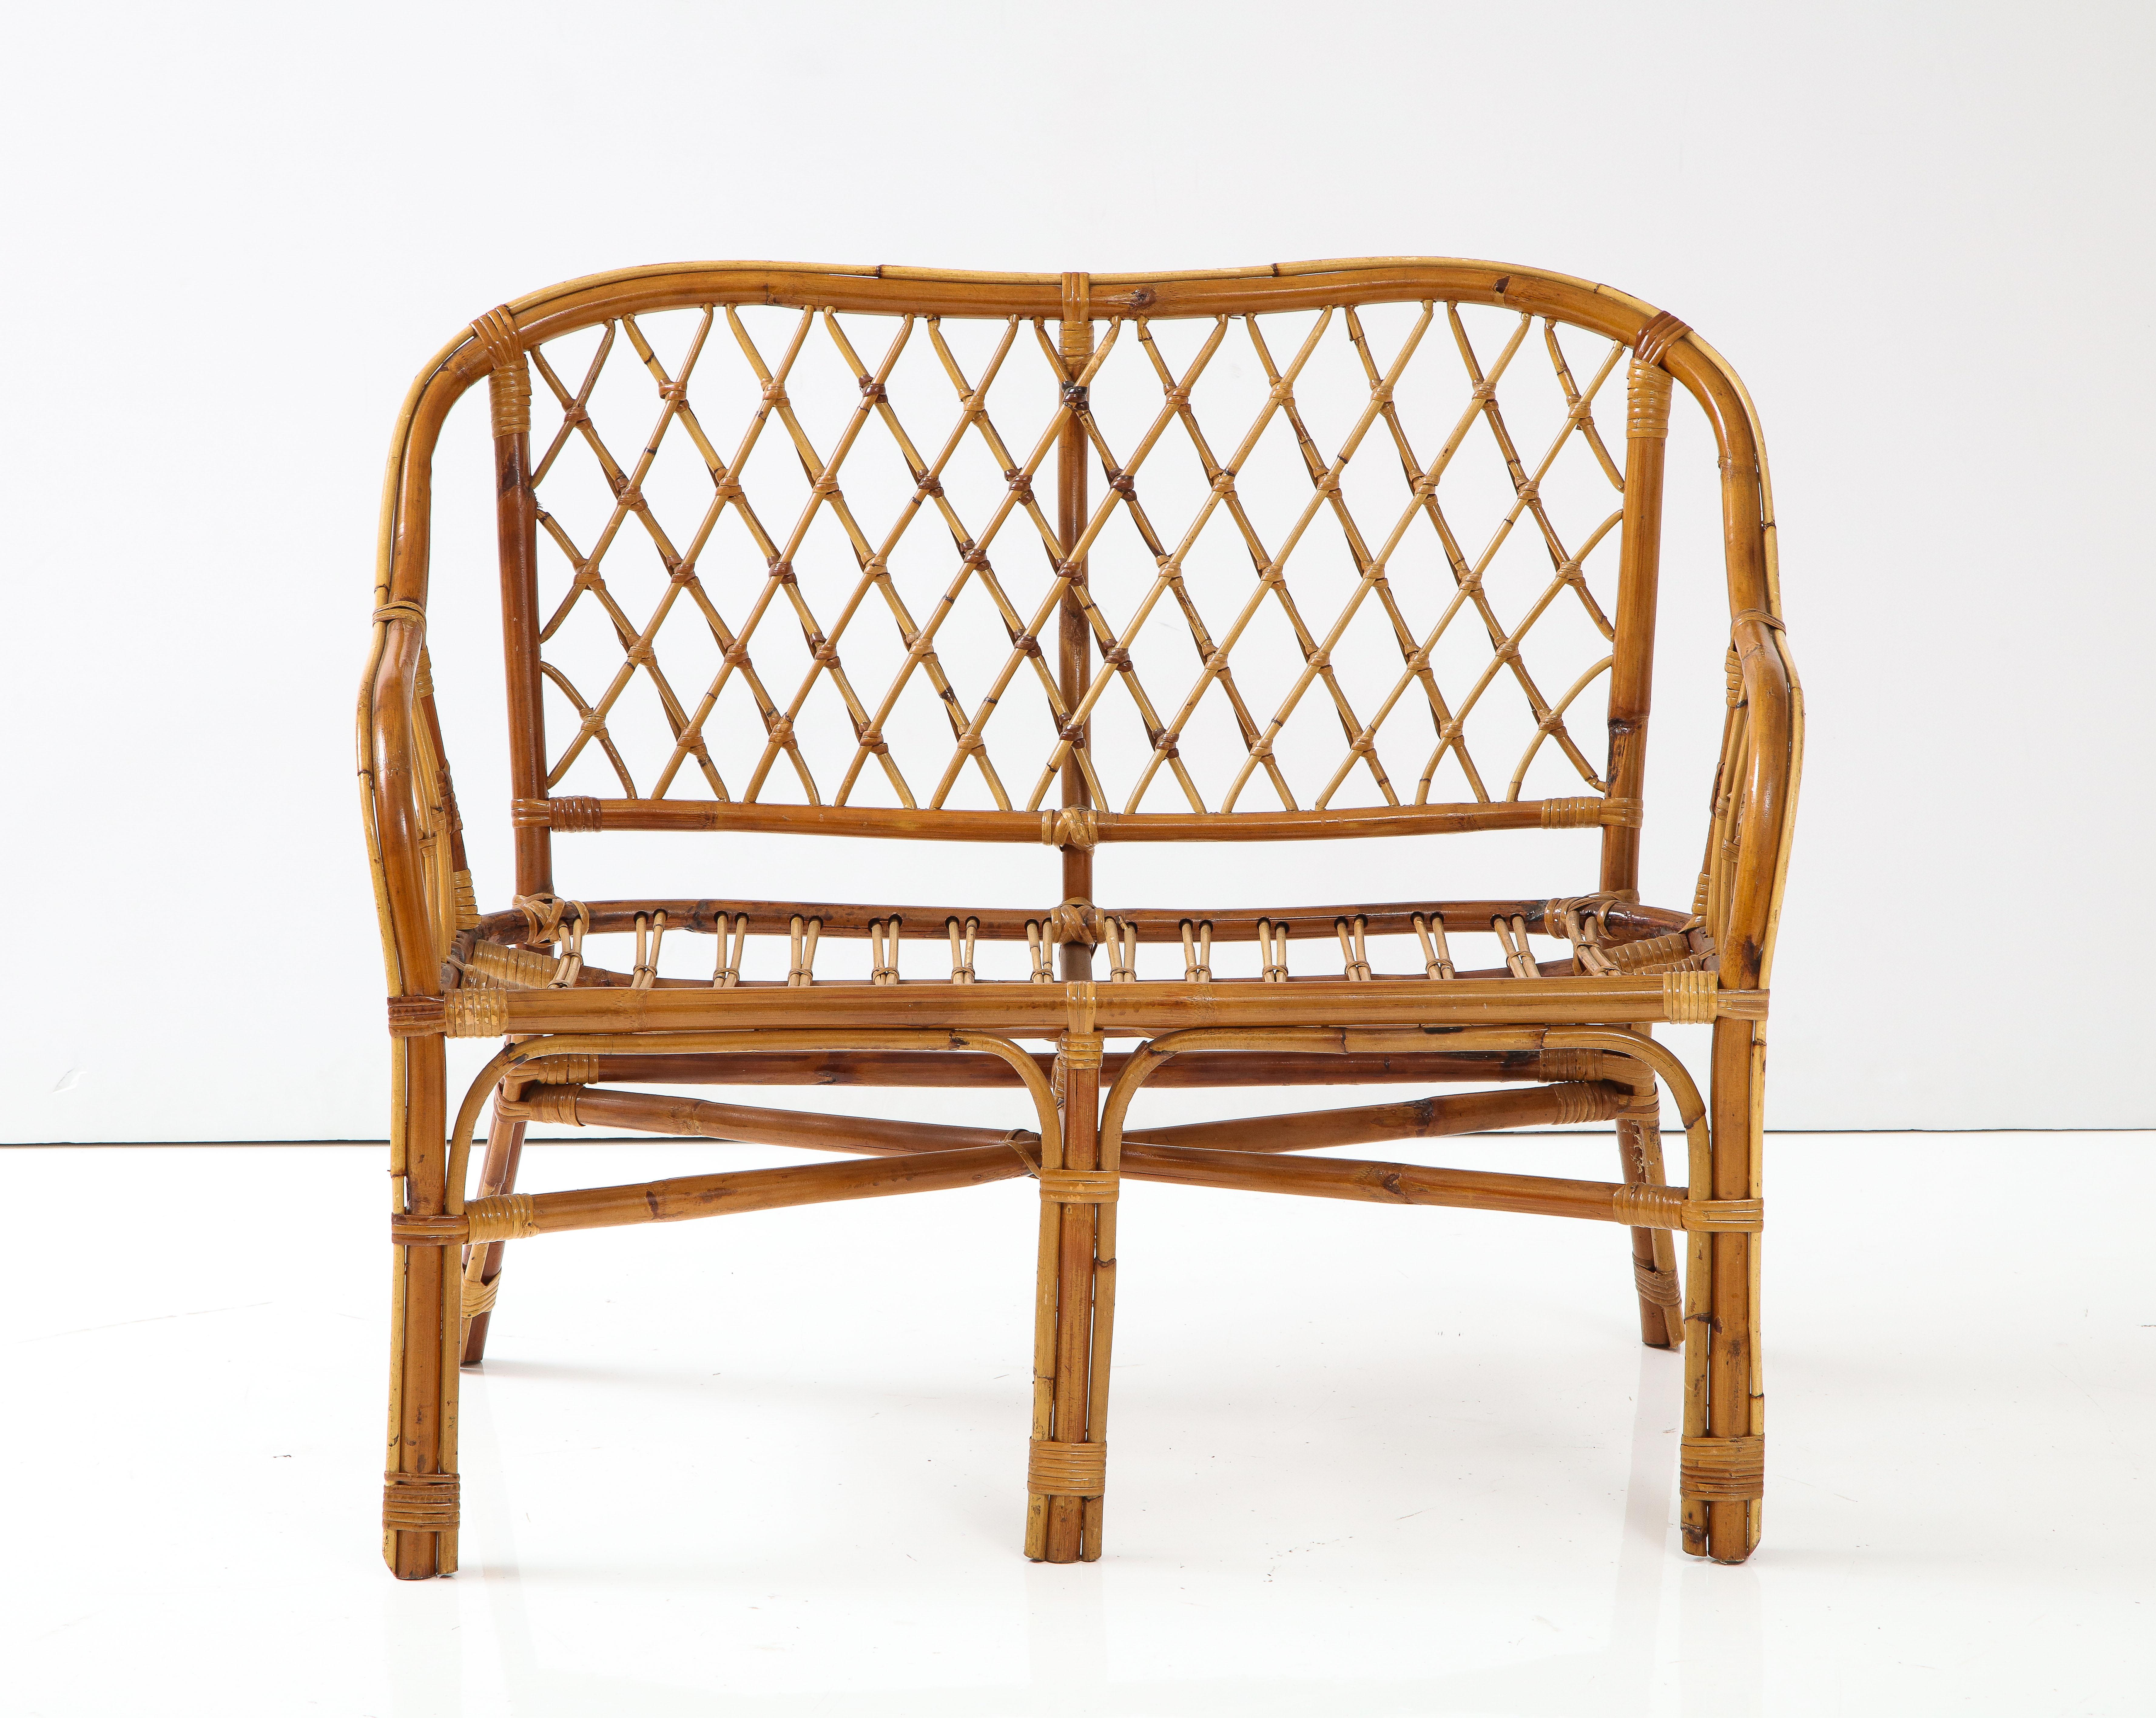 Italian 1950's charming bamboo settee with sloped arms and cross hatch motif within the arms and on the back rest, the bamboo coloring in a beautiful warm variation of warm brown to lighter brown. 
Italy, circa 1950.
Size: 33